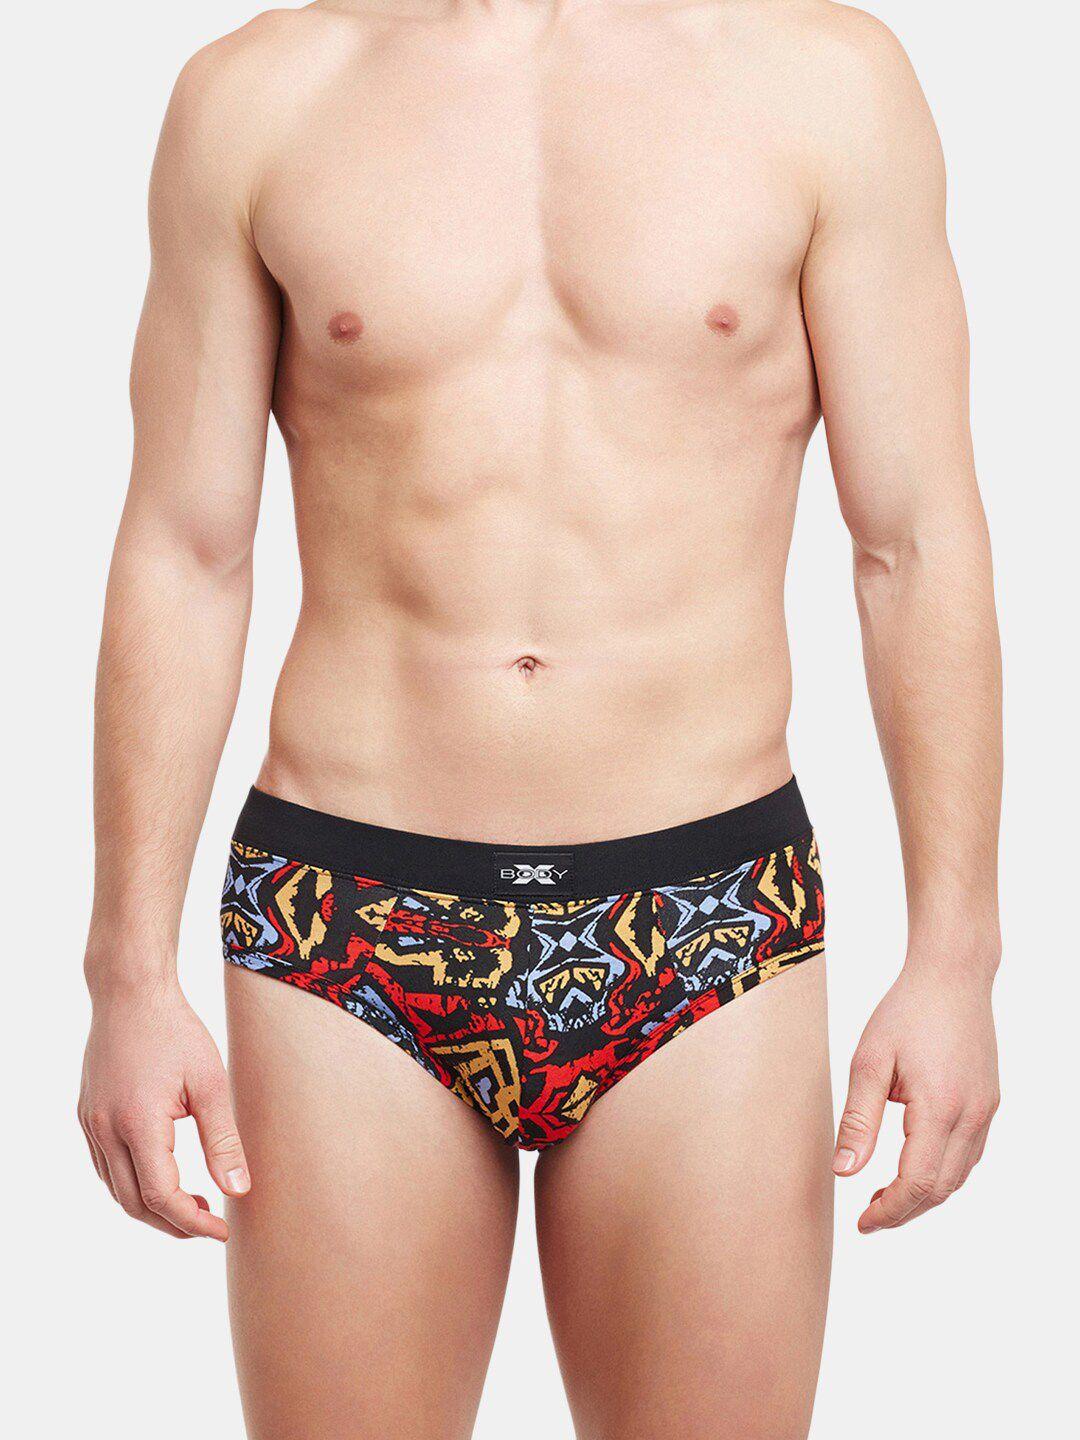 bodyx-men-abstract-printed-low-rise-hipster-brief-bx06b-multi-print-s